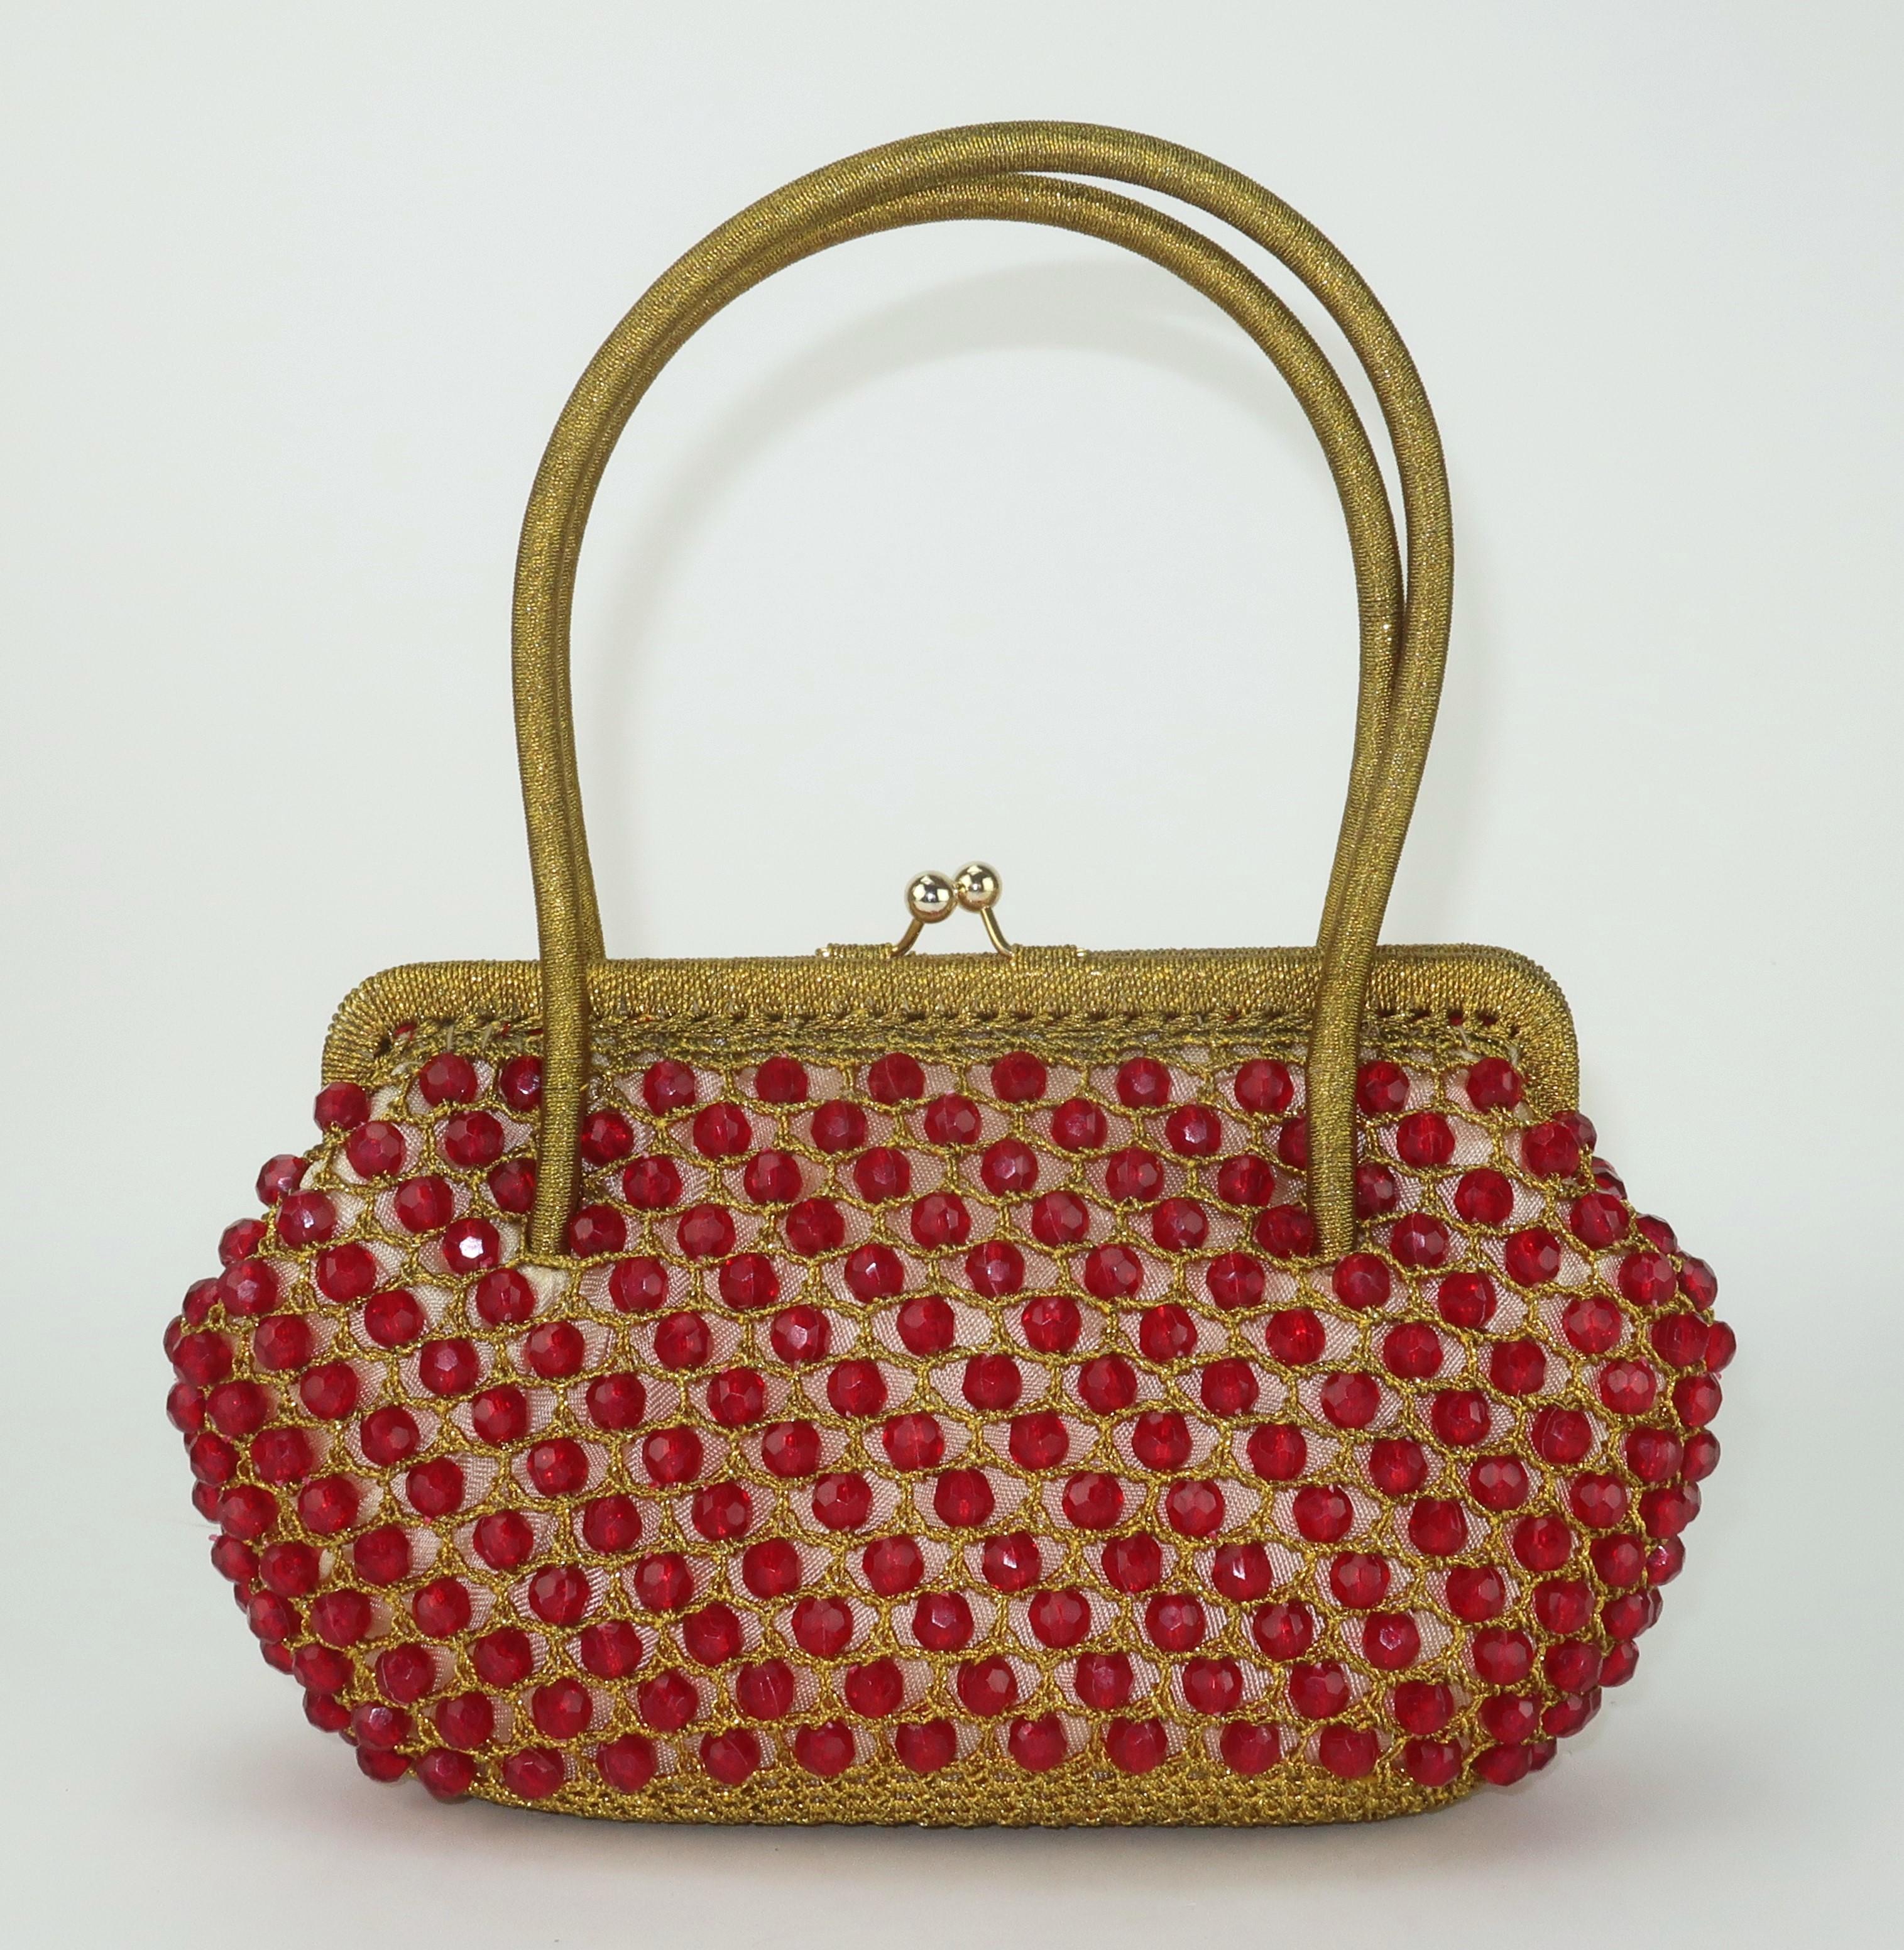 1960's Italian made Barbara Lee gold crochet handbag embellished with ruby red faceted beads.  The double top handle bag features a kiss lock closure which opens to reveal a red satin lined interior.  This precious bauble is a wonderful accessory